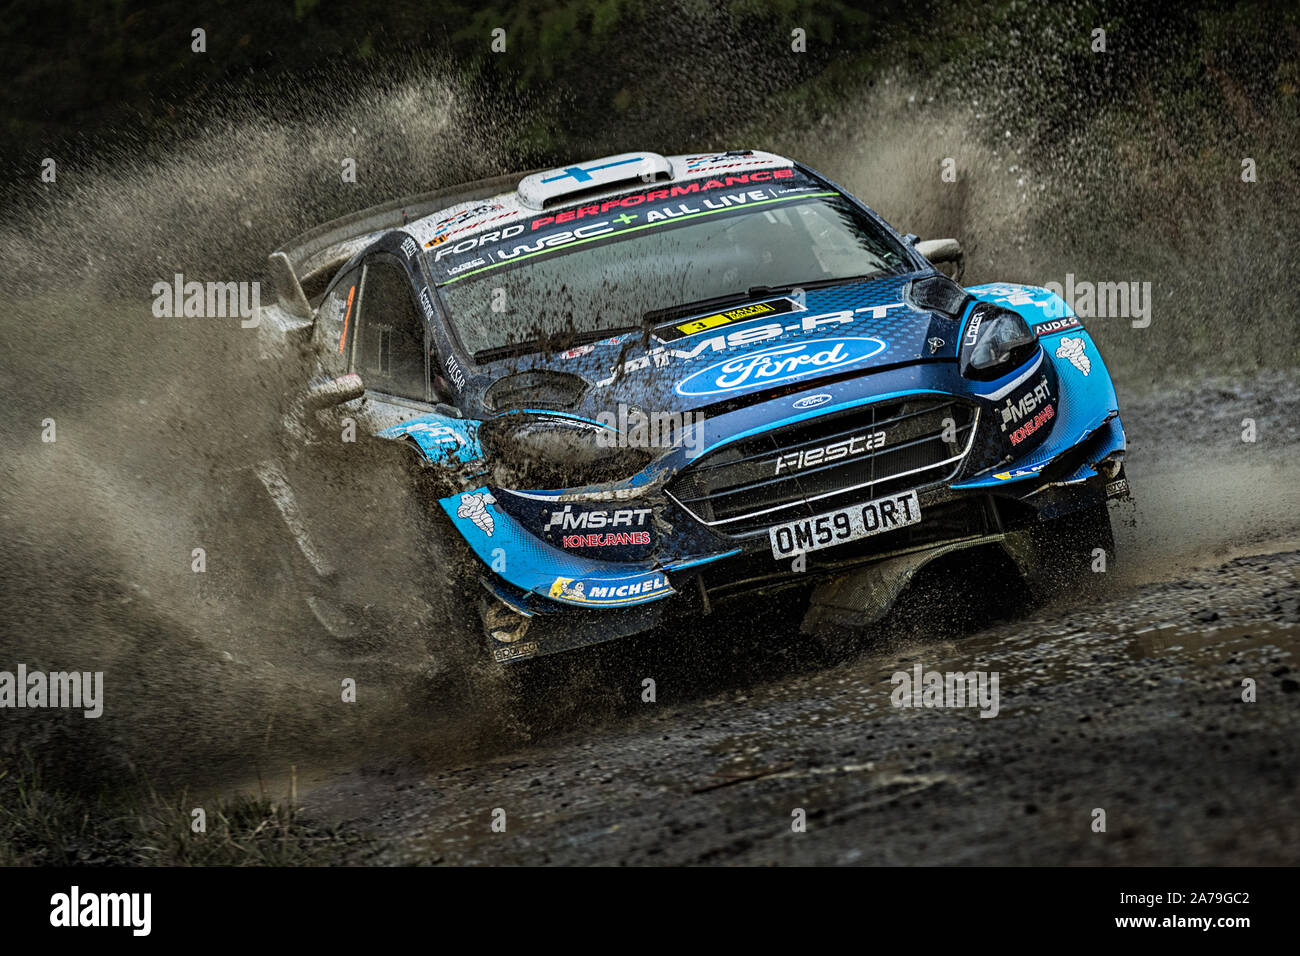 Teemu Suninen driving through a watersplash in the M-sport Ford performance world rally team in the 2019 WRC Wales Rally GB, Wales, UK Stock Photo